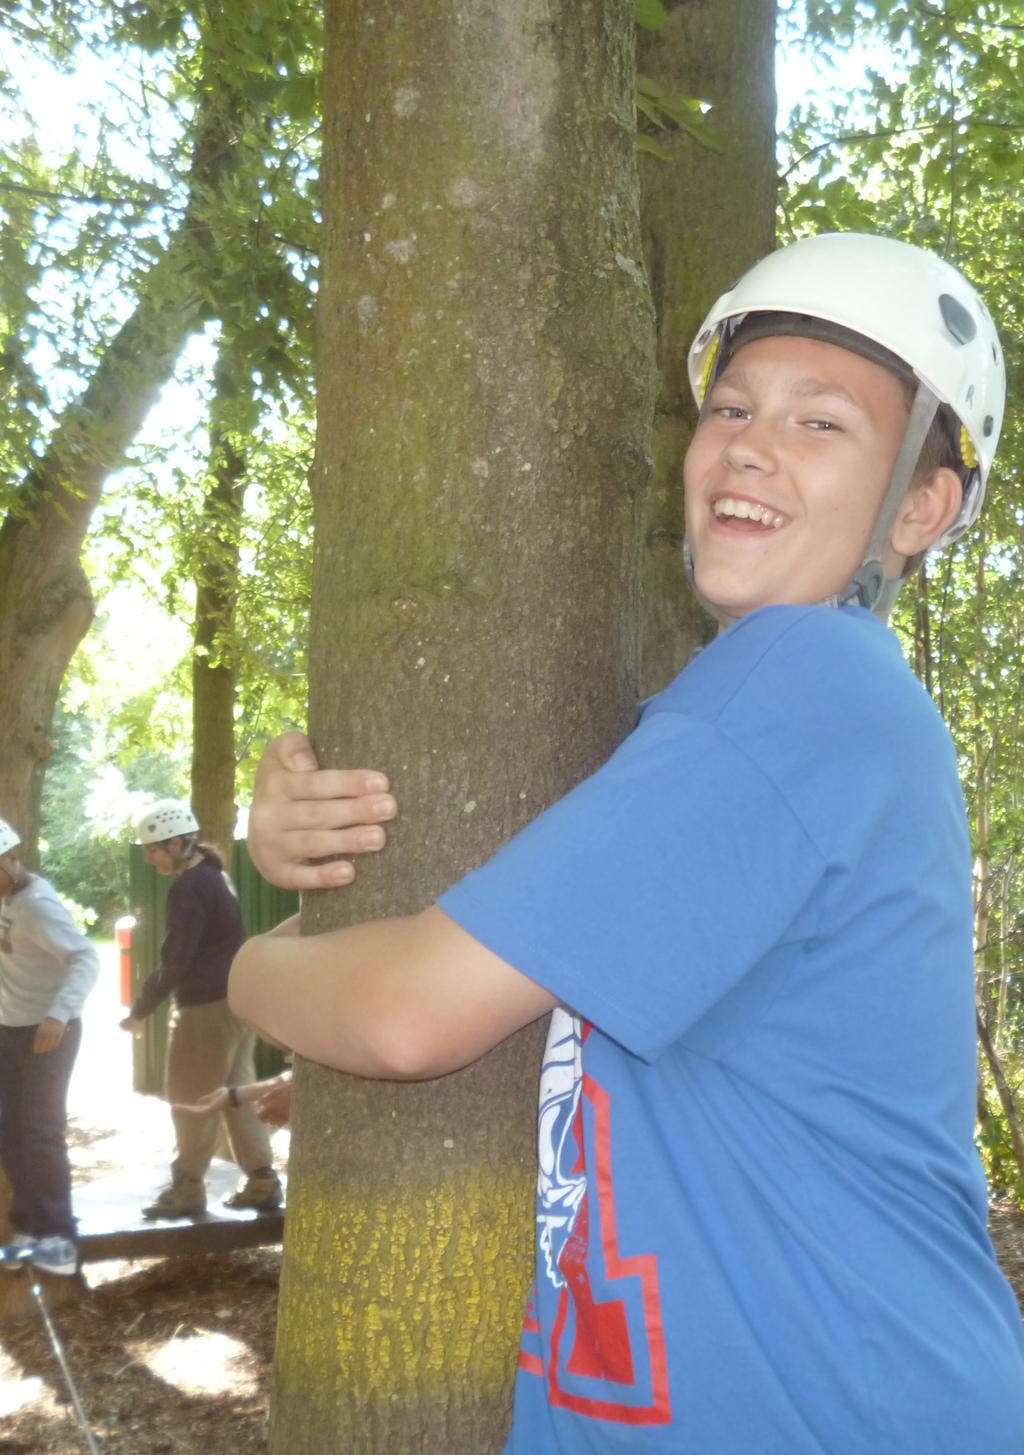 IN 2015/16, WE SUPPORTED 641 YOUNG CARERS AND PROVIDED OVER 2,500 BREAKS FOR THEM Hillingdon